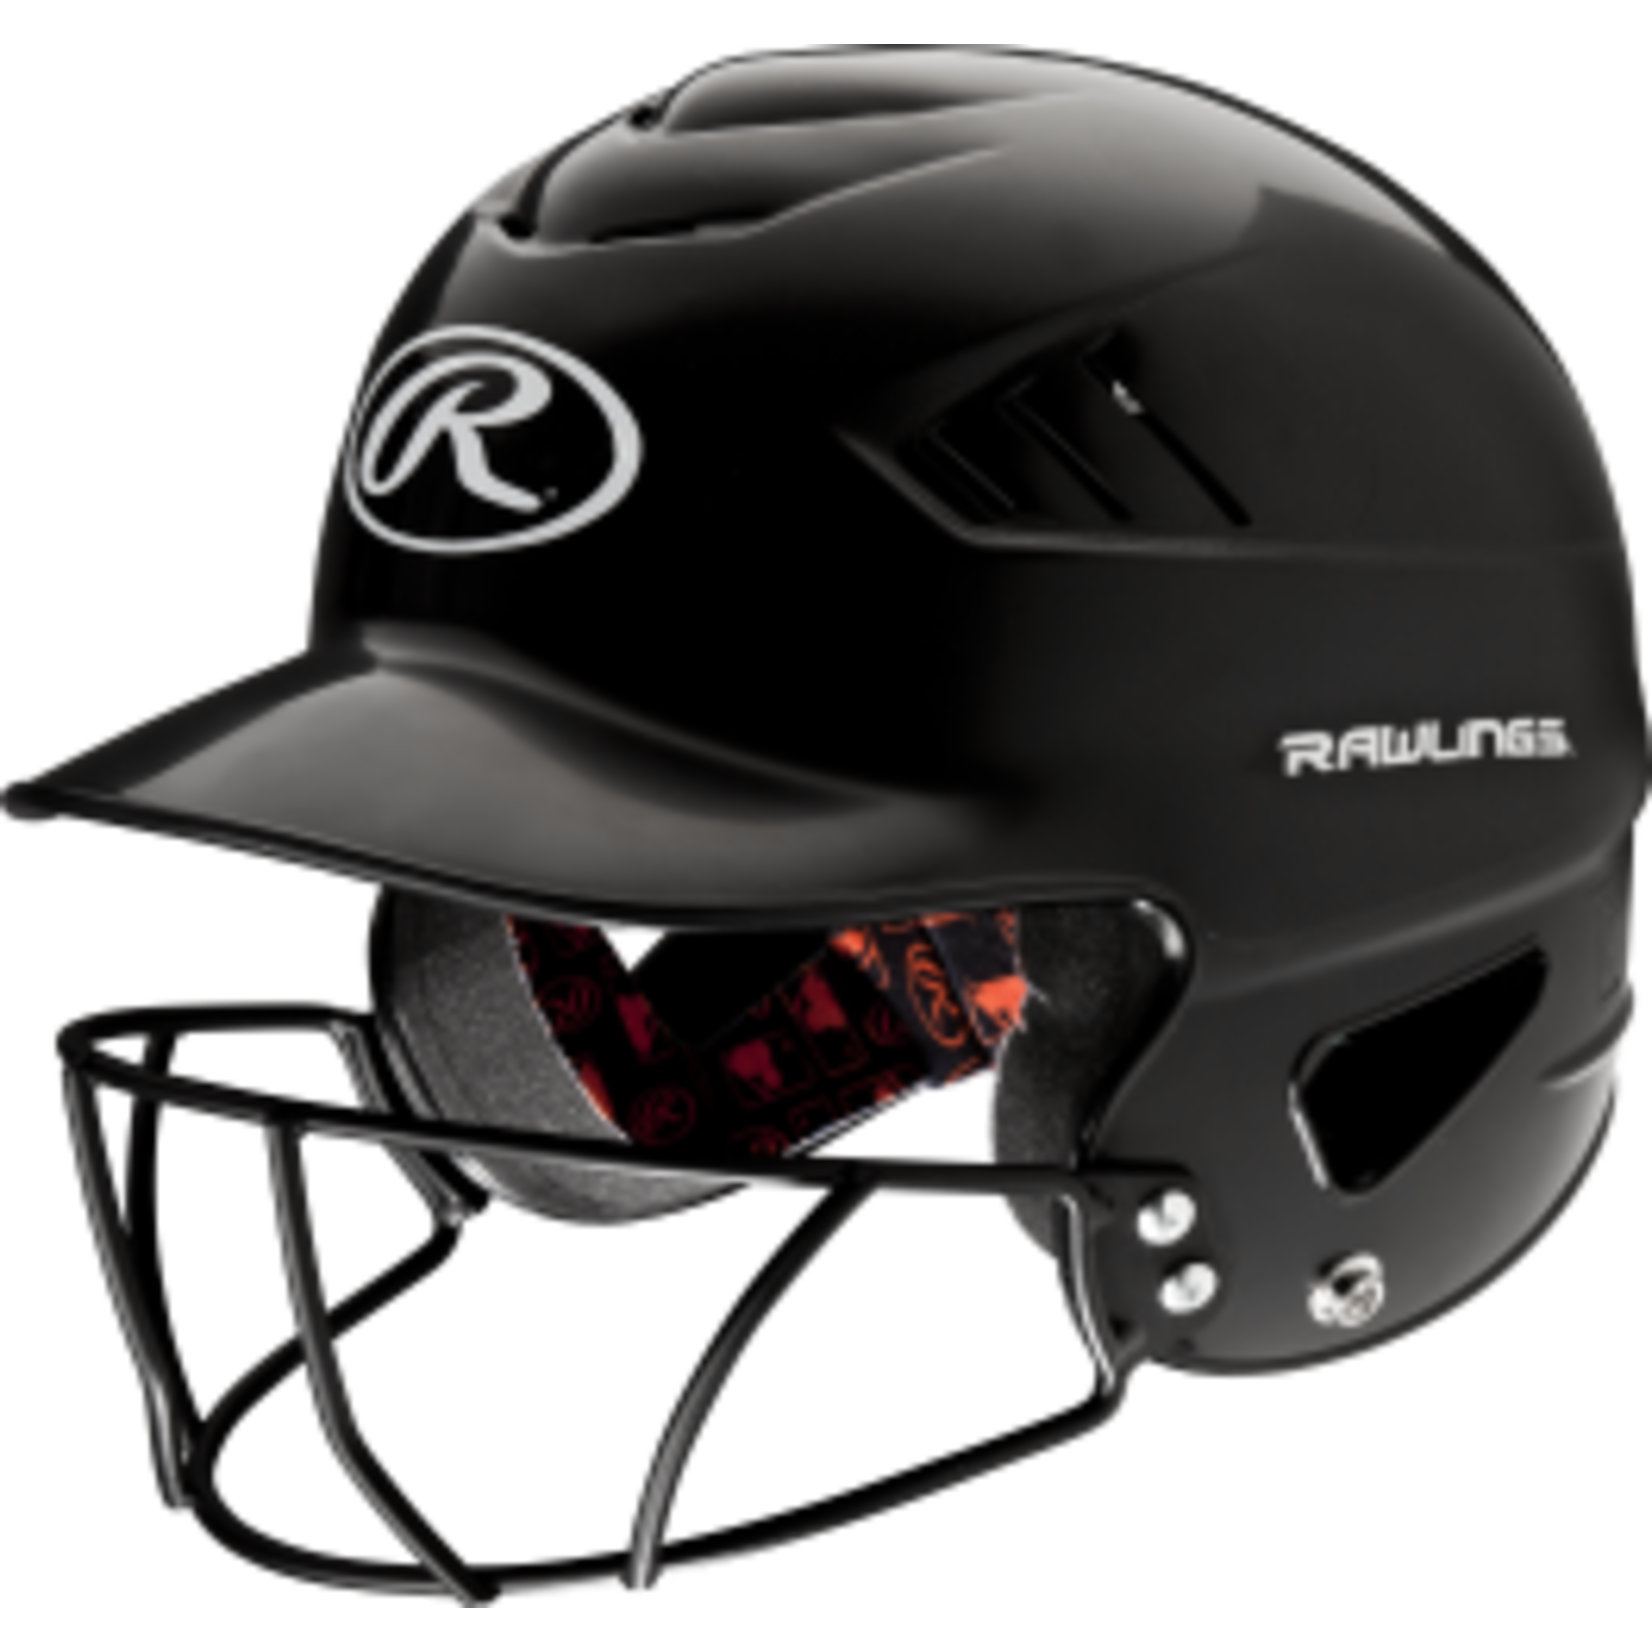 Rawlings Coolflo Batting Helmet with Facemask